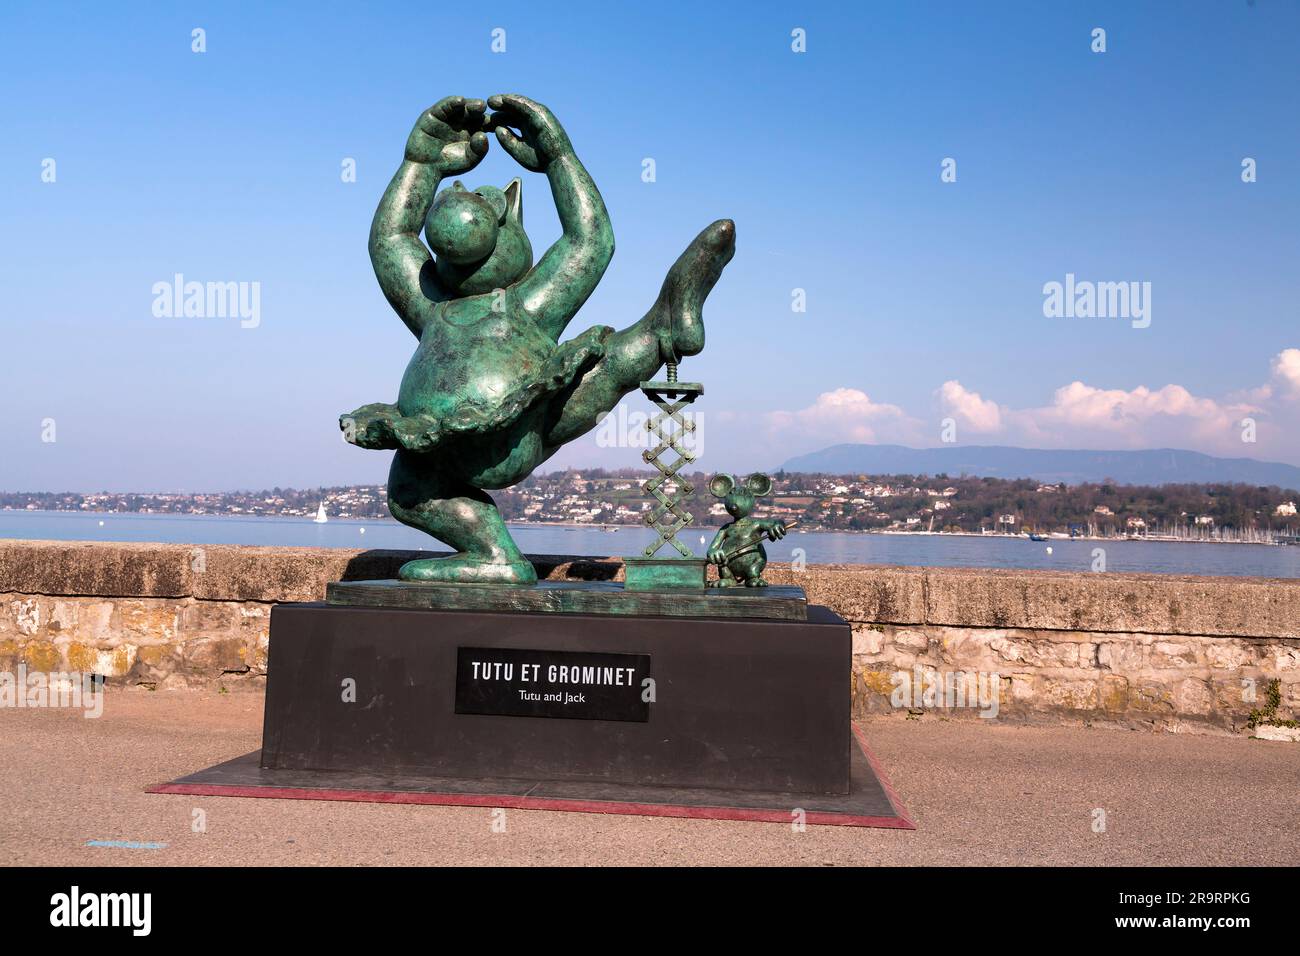 Geneva, Switzerland - 25 March 2022: Exhibition of sculptures Le Chat, created by the Belgian cartoon artist Philippe Geluck, along the Leman lakeside Stock Photo